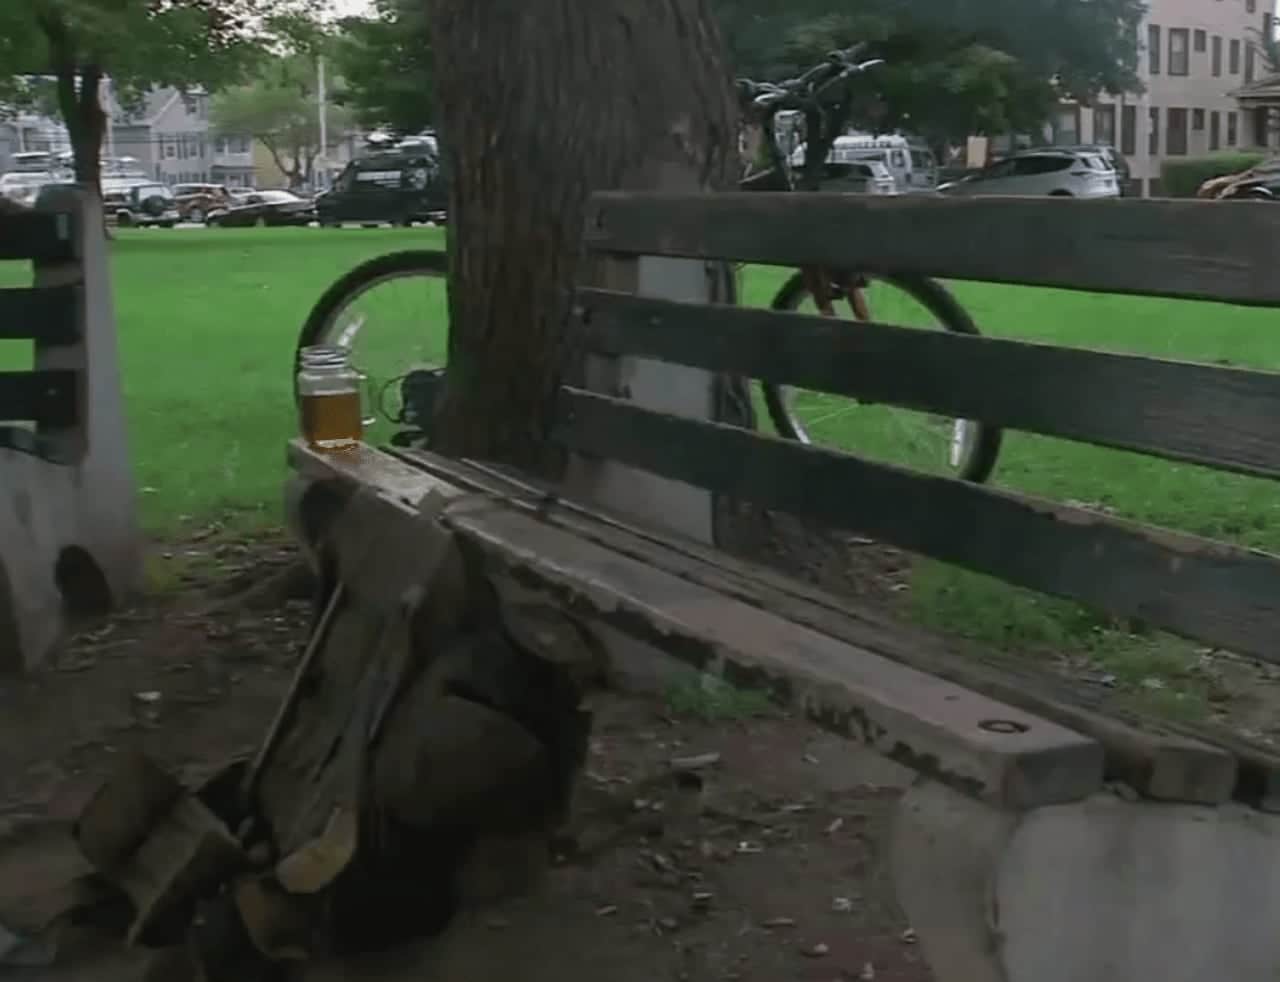 A bench at Mansion Square Park in Poughkeepsie near the tree that was hit Friday afternoon by a lightning strike that killed one man and injured four other people.